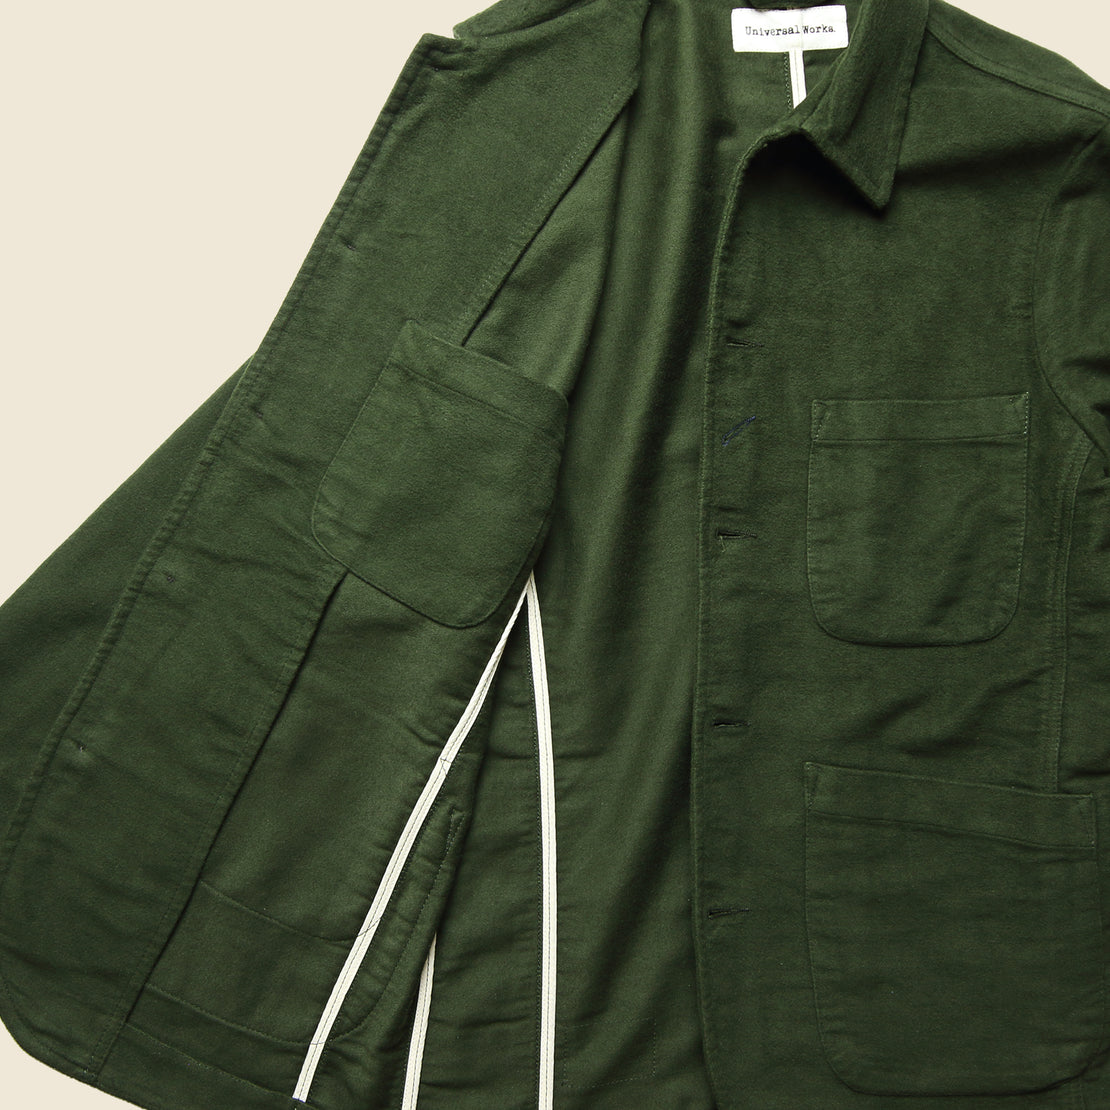 Bakers Jacket - Olive Moleskin - Universal Works - STAG Provisions - Outerwear - Coat / Jacket